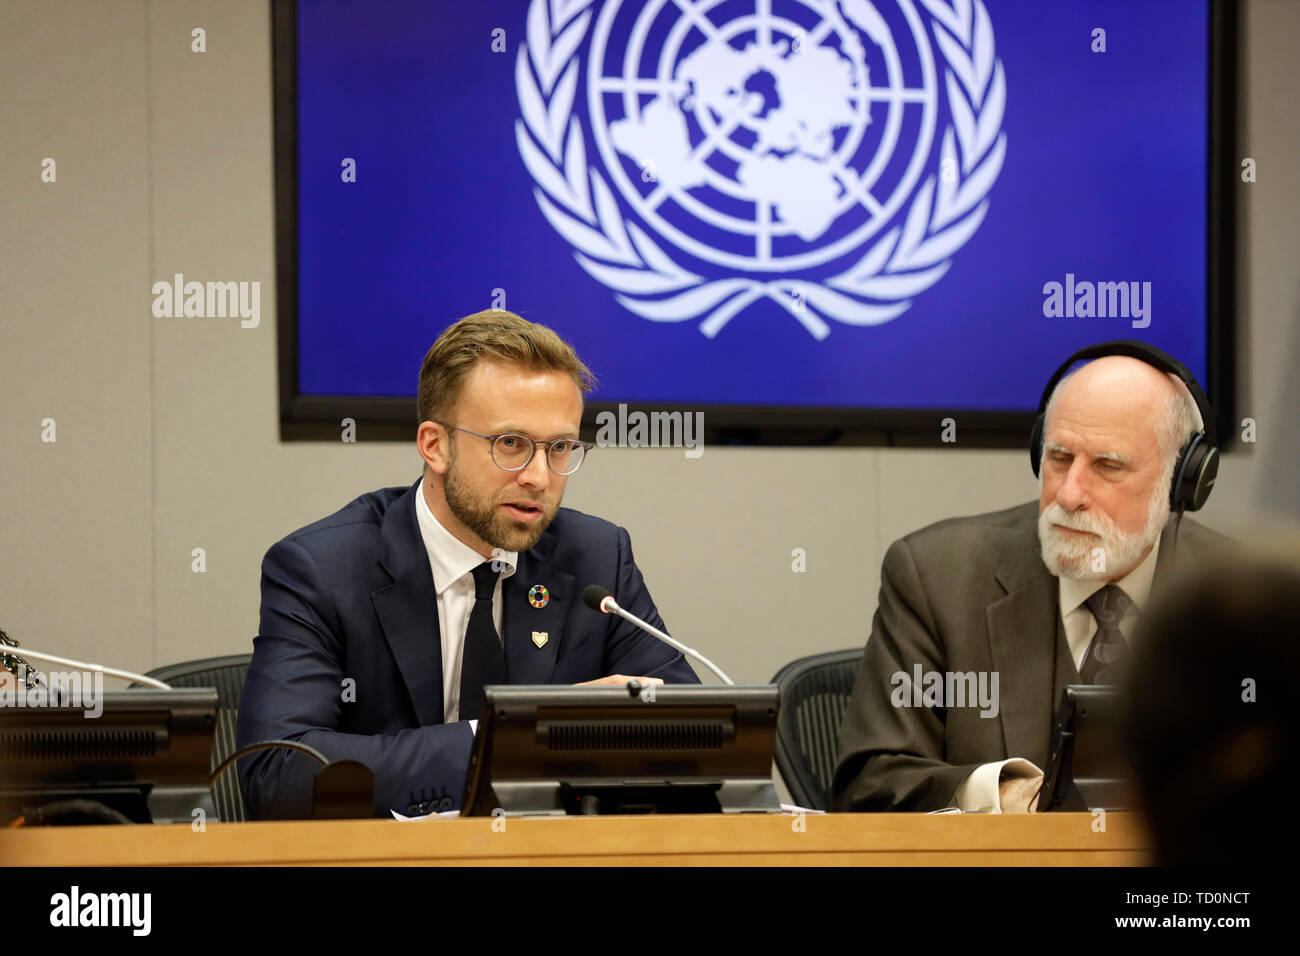 United Nations, UN headquarters in New York. 10th June, 2019. Nikolai Astrup (L), Norway's Minister of Digitalization, speaks during a press briefing on the report of the High-level Panel on Digital Cooperation, at the UN headquarters in New York, on June 10, 2019. An expert group appointed by the United Nations called on governments, the private sector and civil society, in its first report released Monday, to work together urgently to maximize the benefits and minimize the harms of digital technologies. Credit: Li Muzi/Xinhua/Alamy Live News Stock Photo